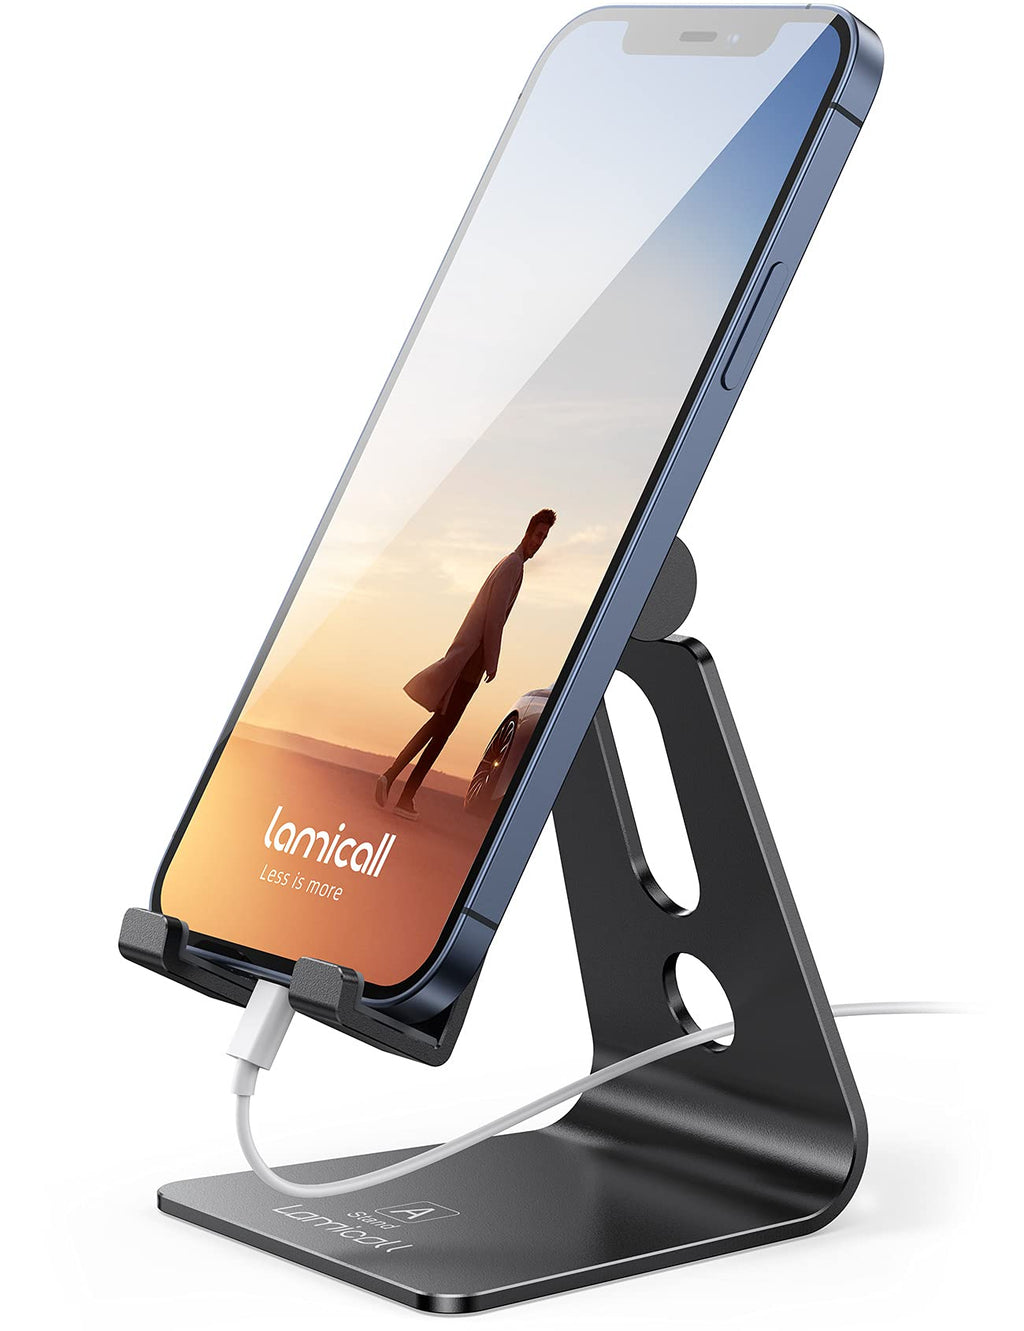  [AUSTRALIA] - Adjustable Cell Phone Stand, Lamicall Desk Phone Holder, Cradle, Dock, Compatible with All 4-8'' Phones, Office Accessories, All Android Smartphone - Black